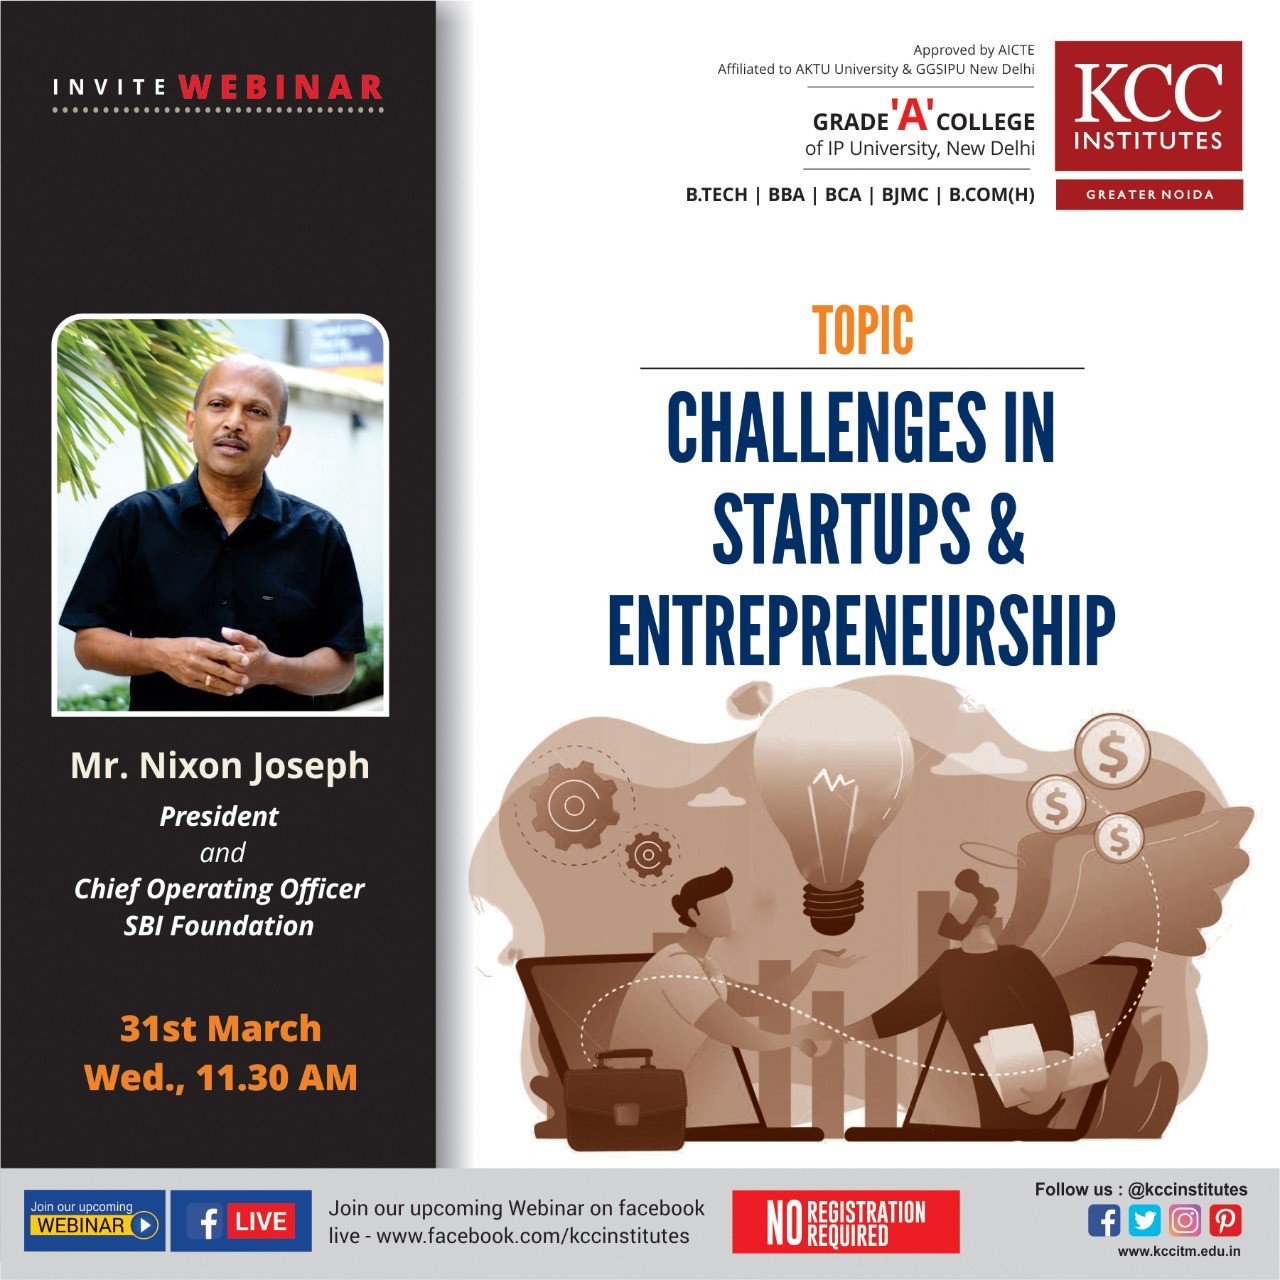 Mr. Nixon Joseph, President and Chief Operating Officer SBI Foundation for the Webinar on "CHALLENGES IN STARTUPS & ENTREPRENEURSHIP" Organized by KCC Institutes, Delhi-NCR, Greater Noida.